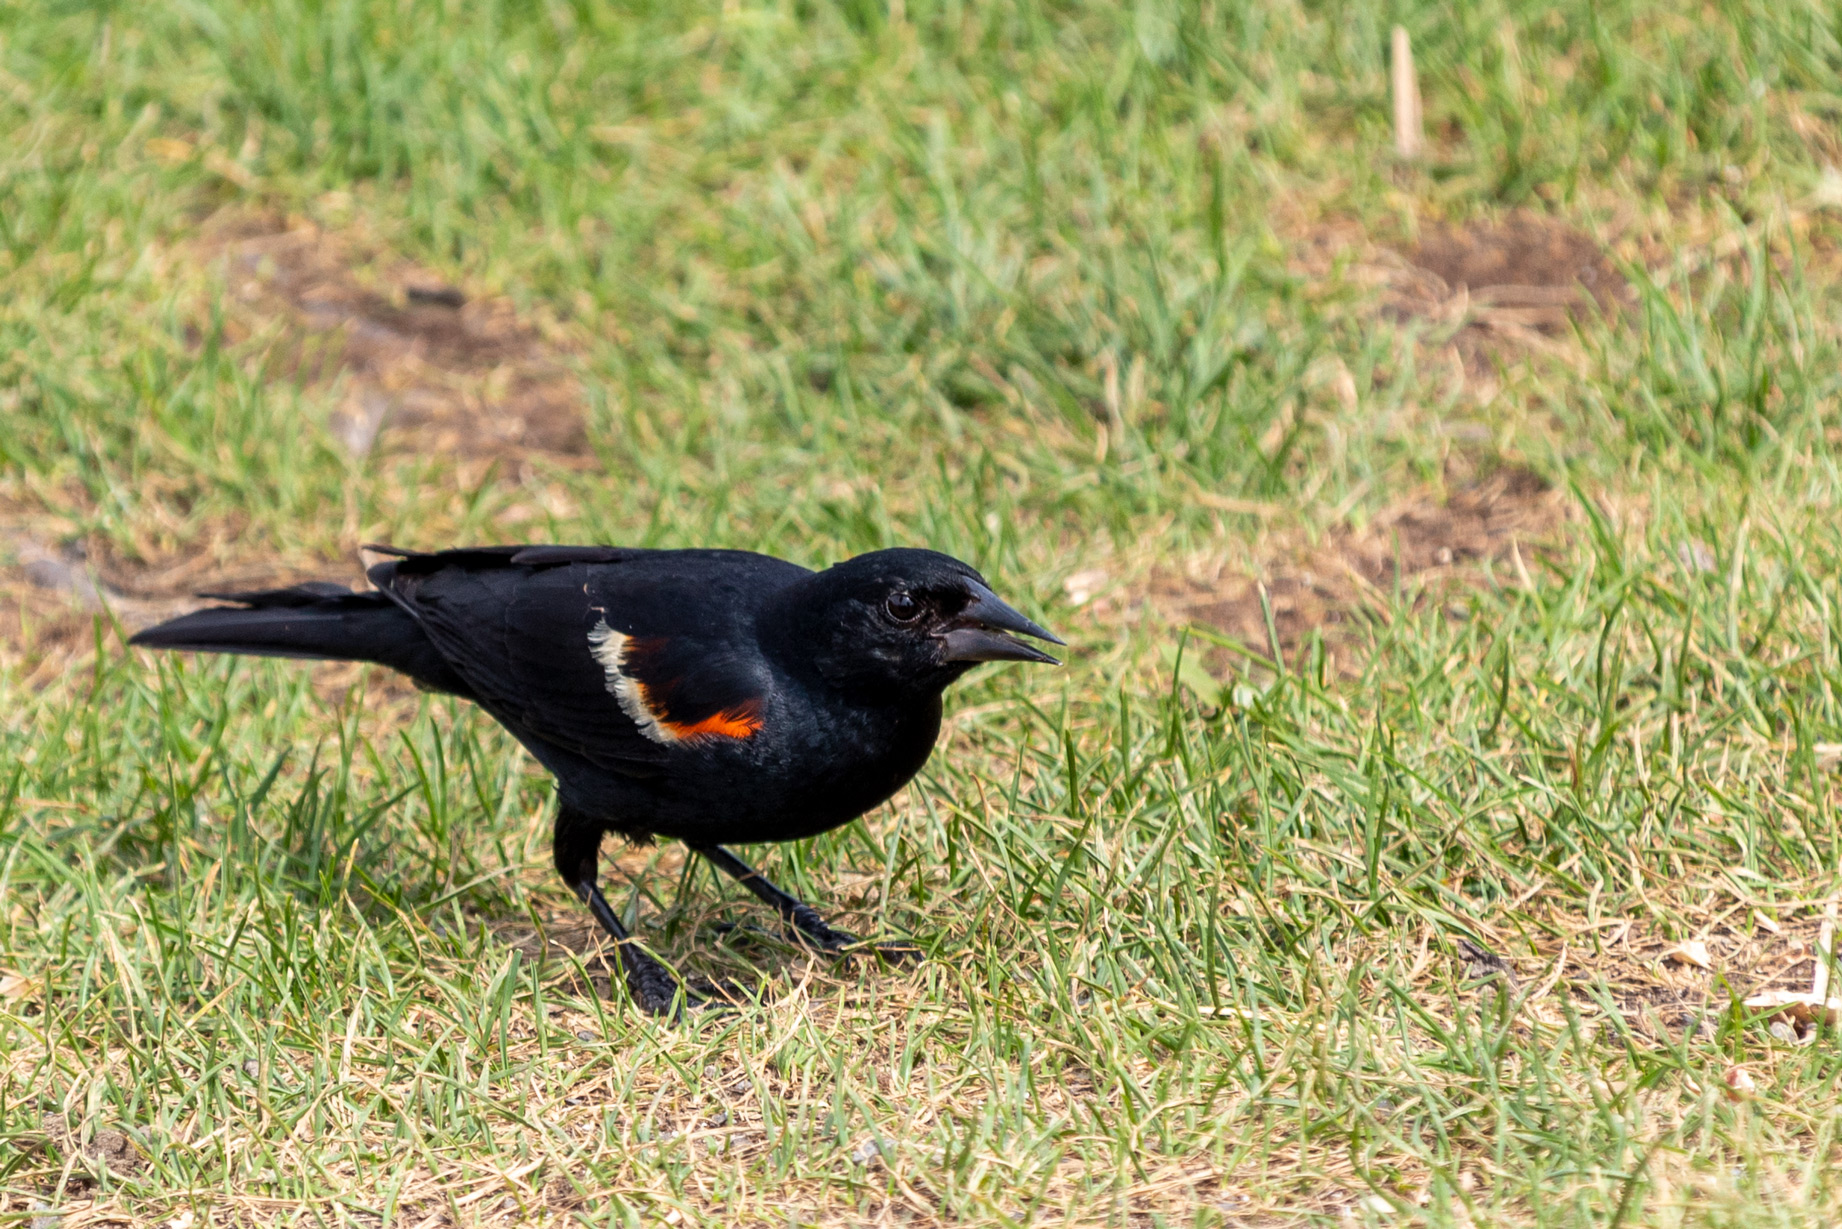 Black bird with a colourful stripe on its wing fading from bright orange to white